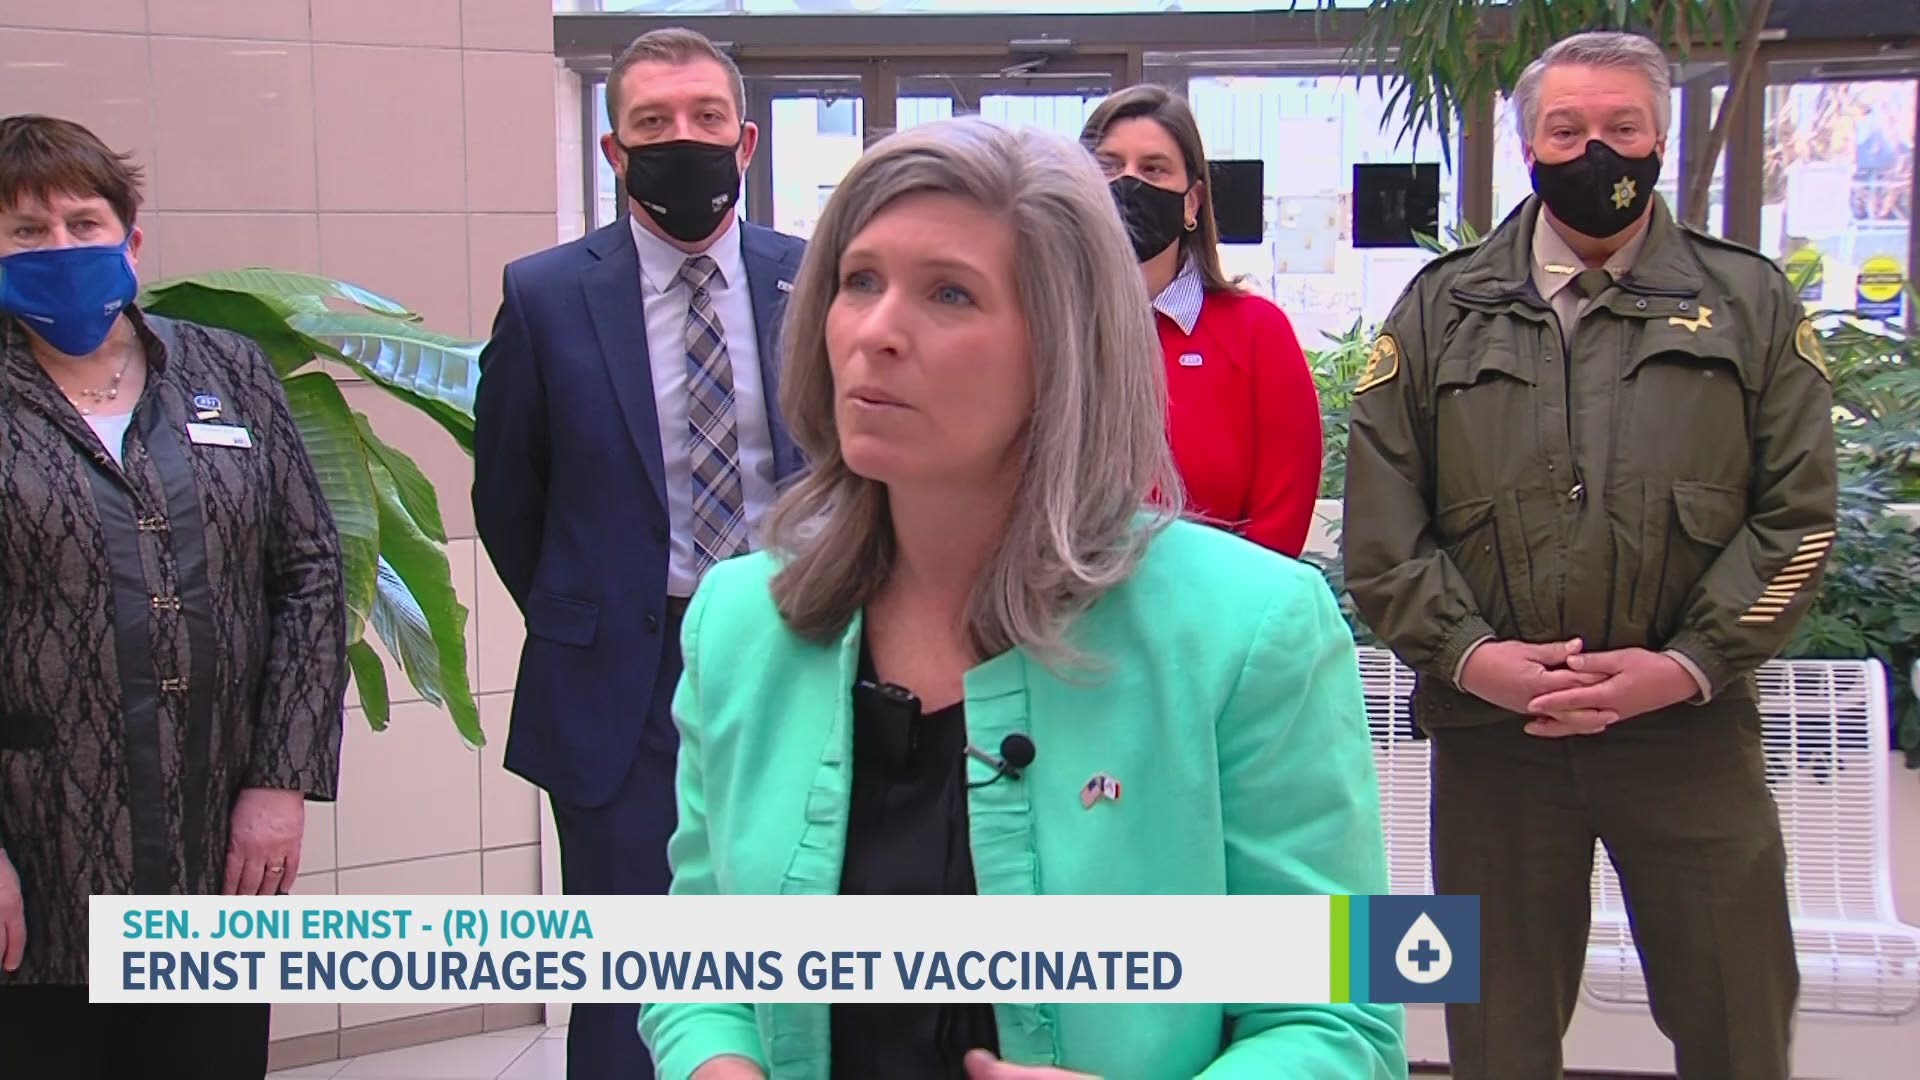 The Republican senator urged all Iowans to get their vaccine as soon as they are able to.